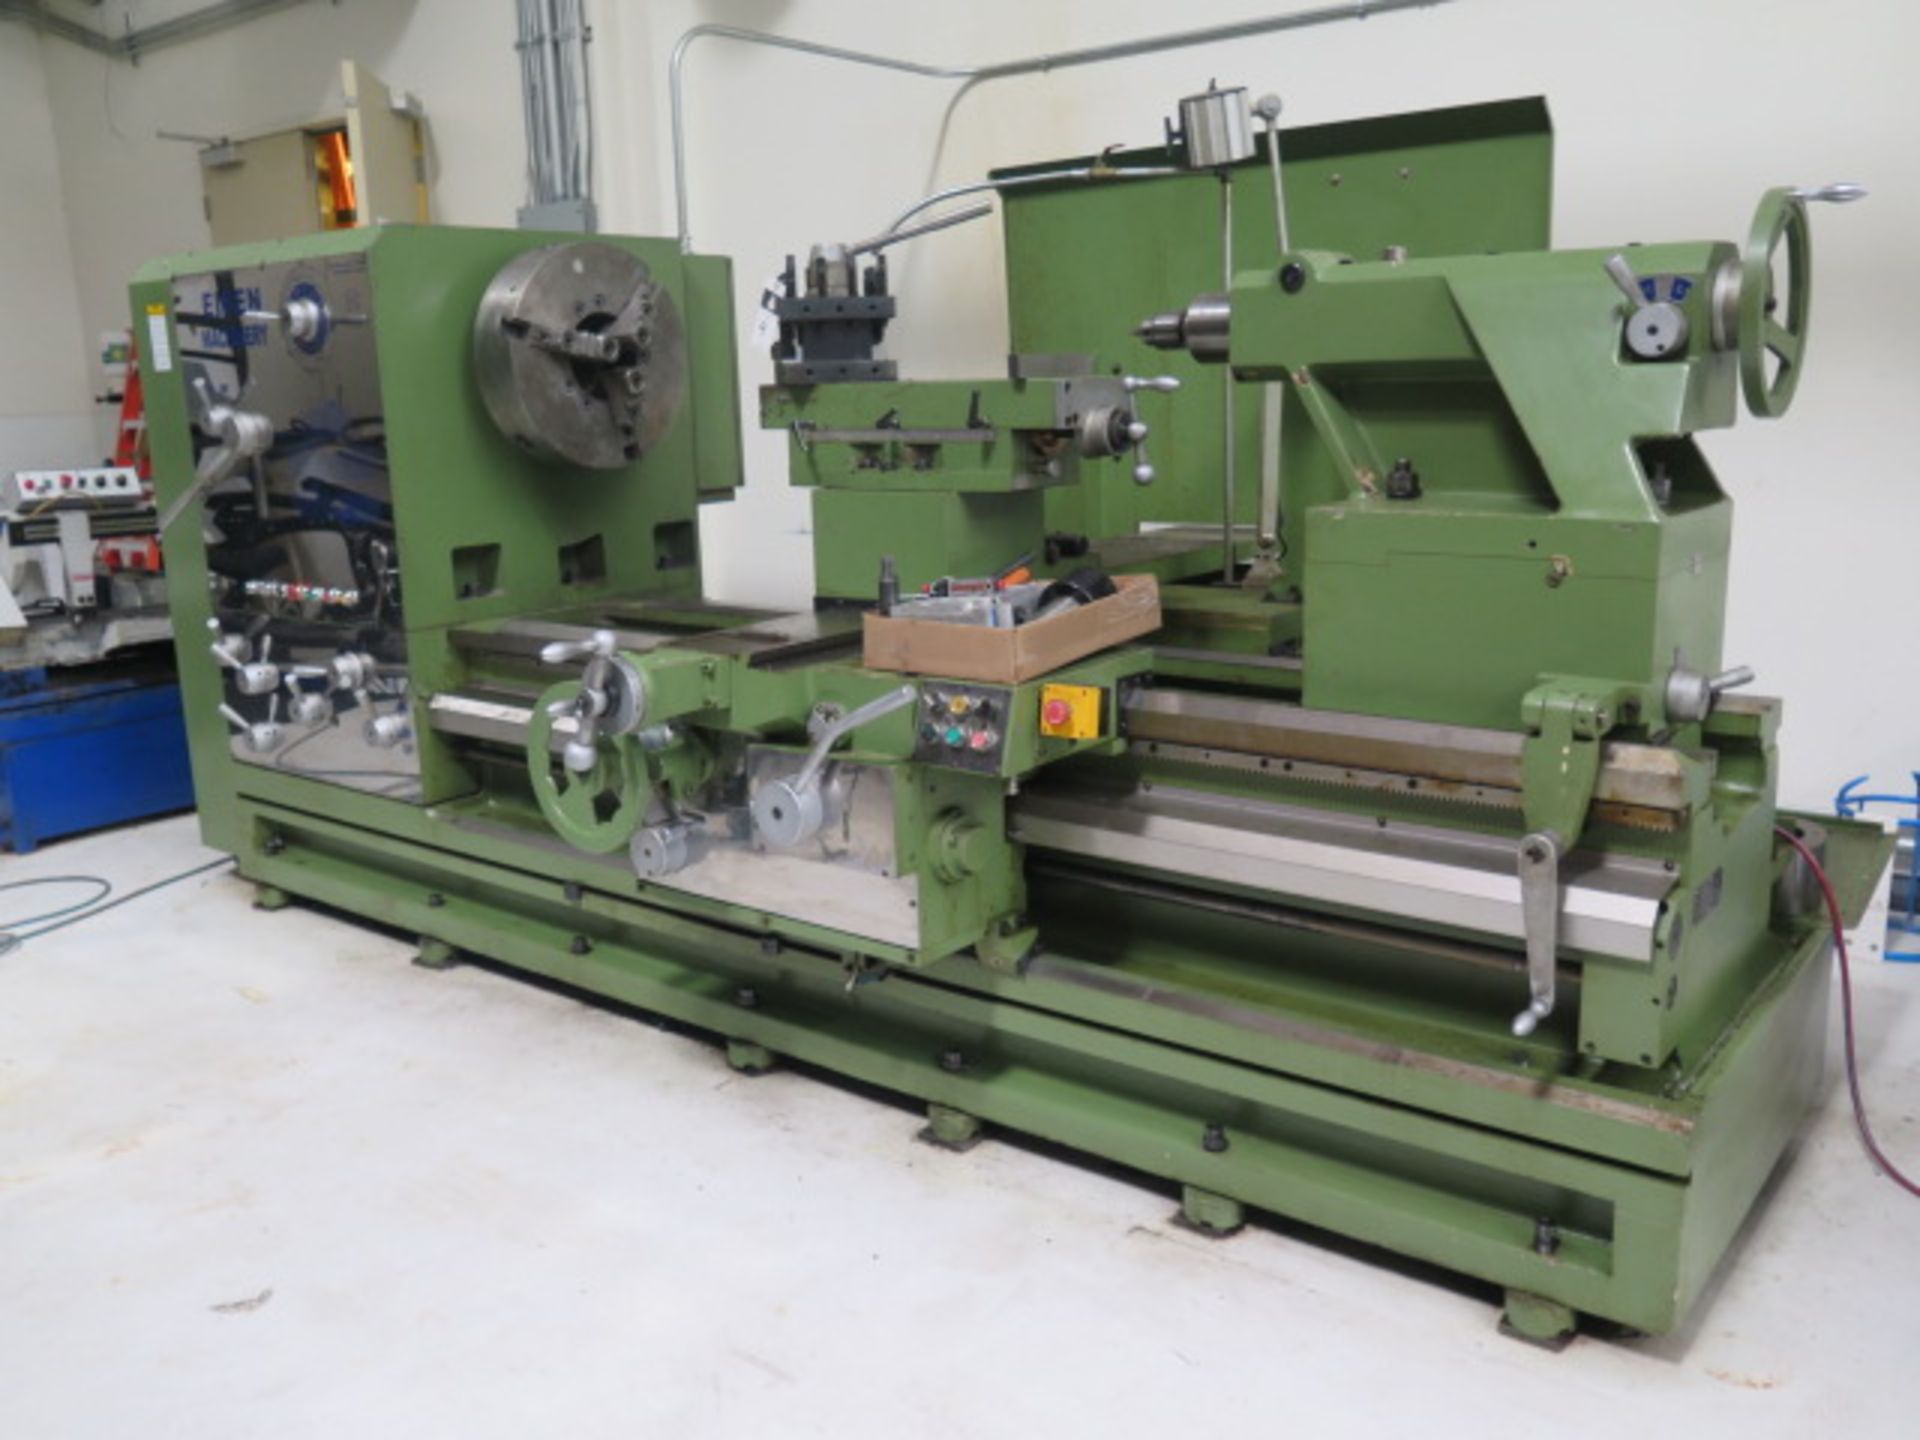 2008 Eisen PS-4560 45” x 60” Geared Head Lathe s/n 08120678 w/ 6” Thru Spindle Bore, 7-700 RPM, - Image 4 of 16